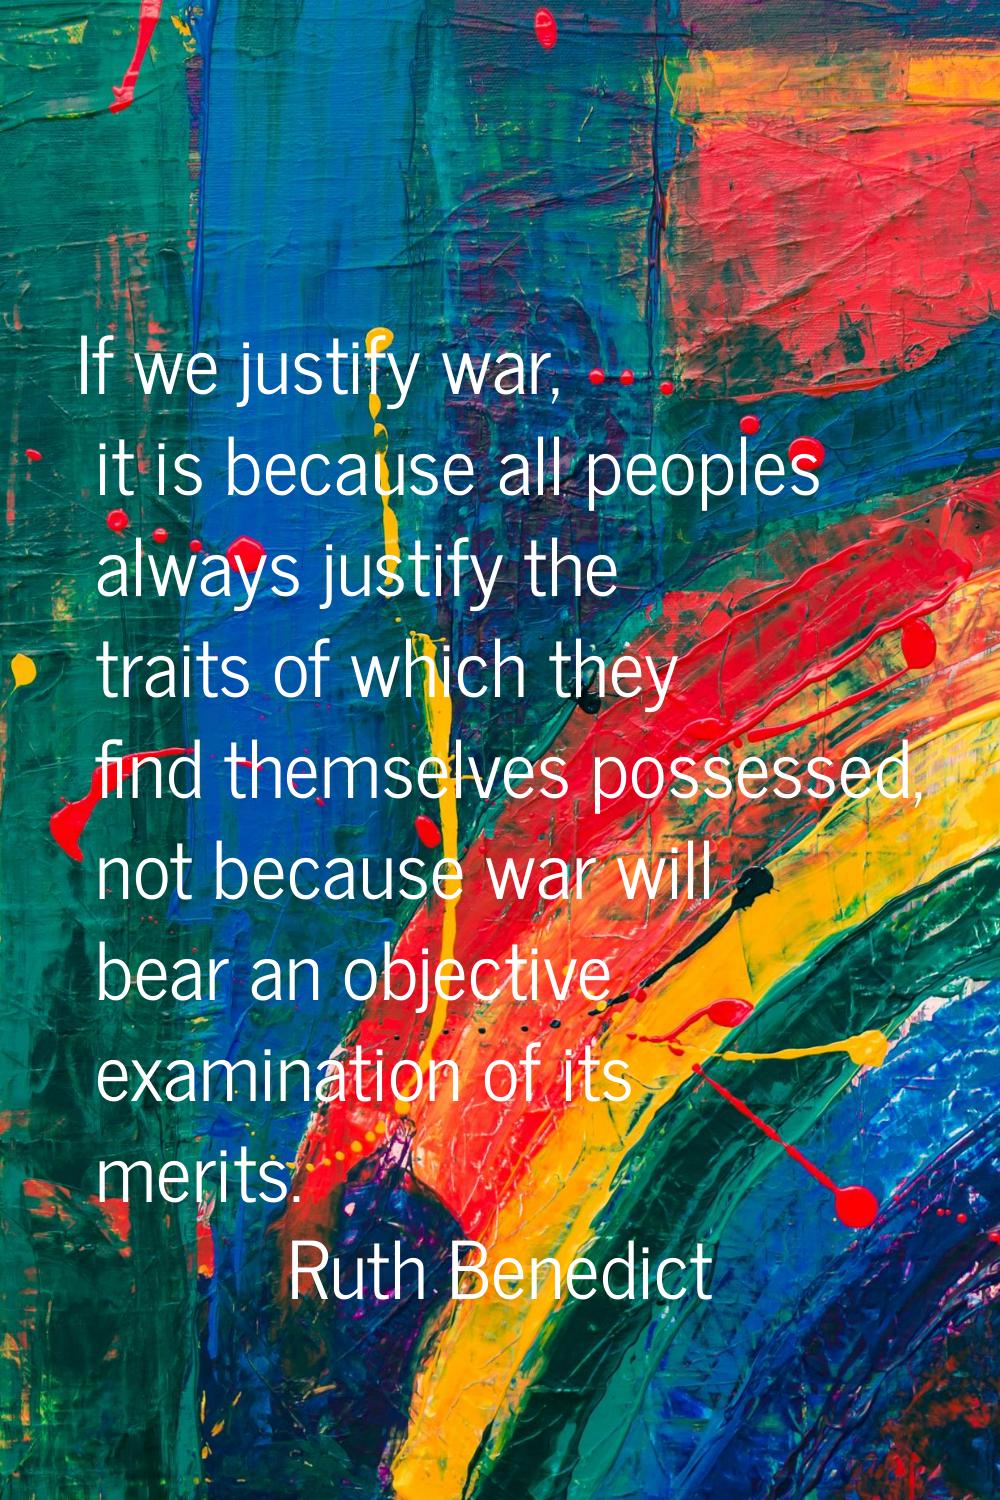 If we justify war, it is because all peoples always justify the traits of which they find themselve